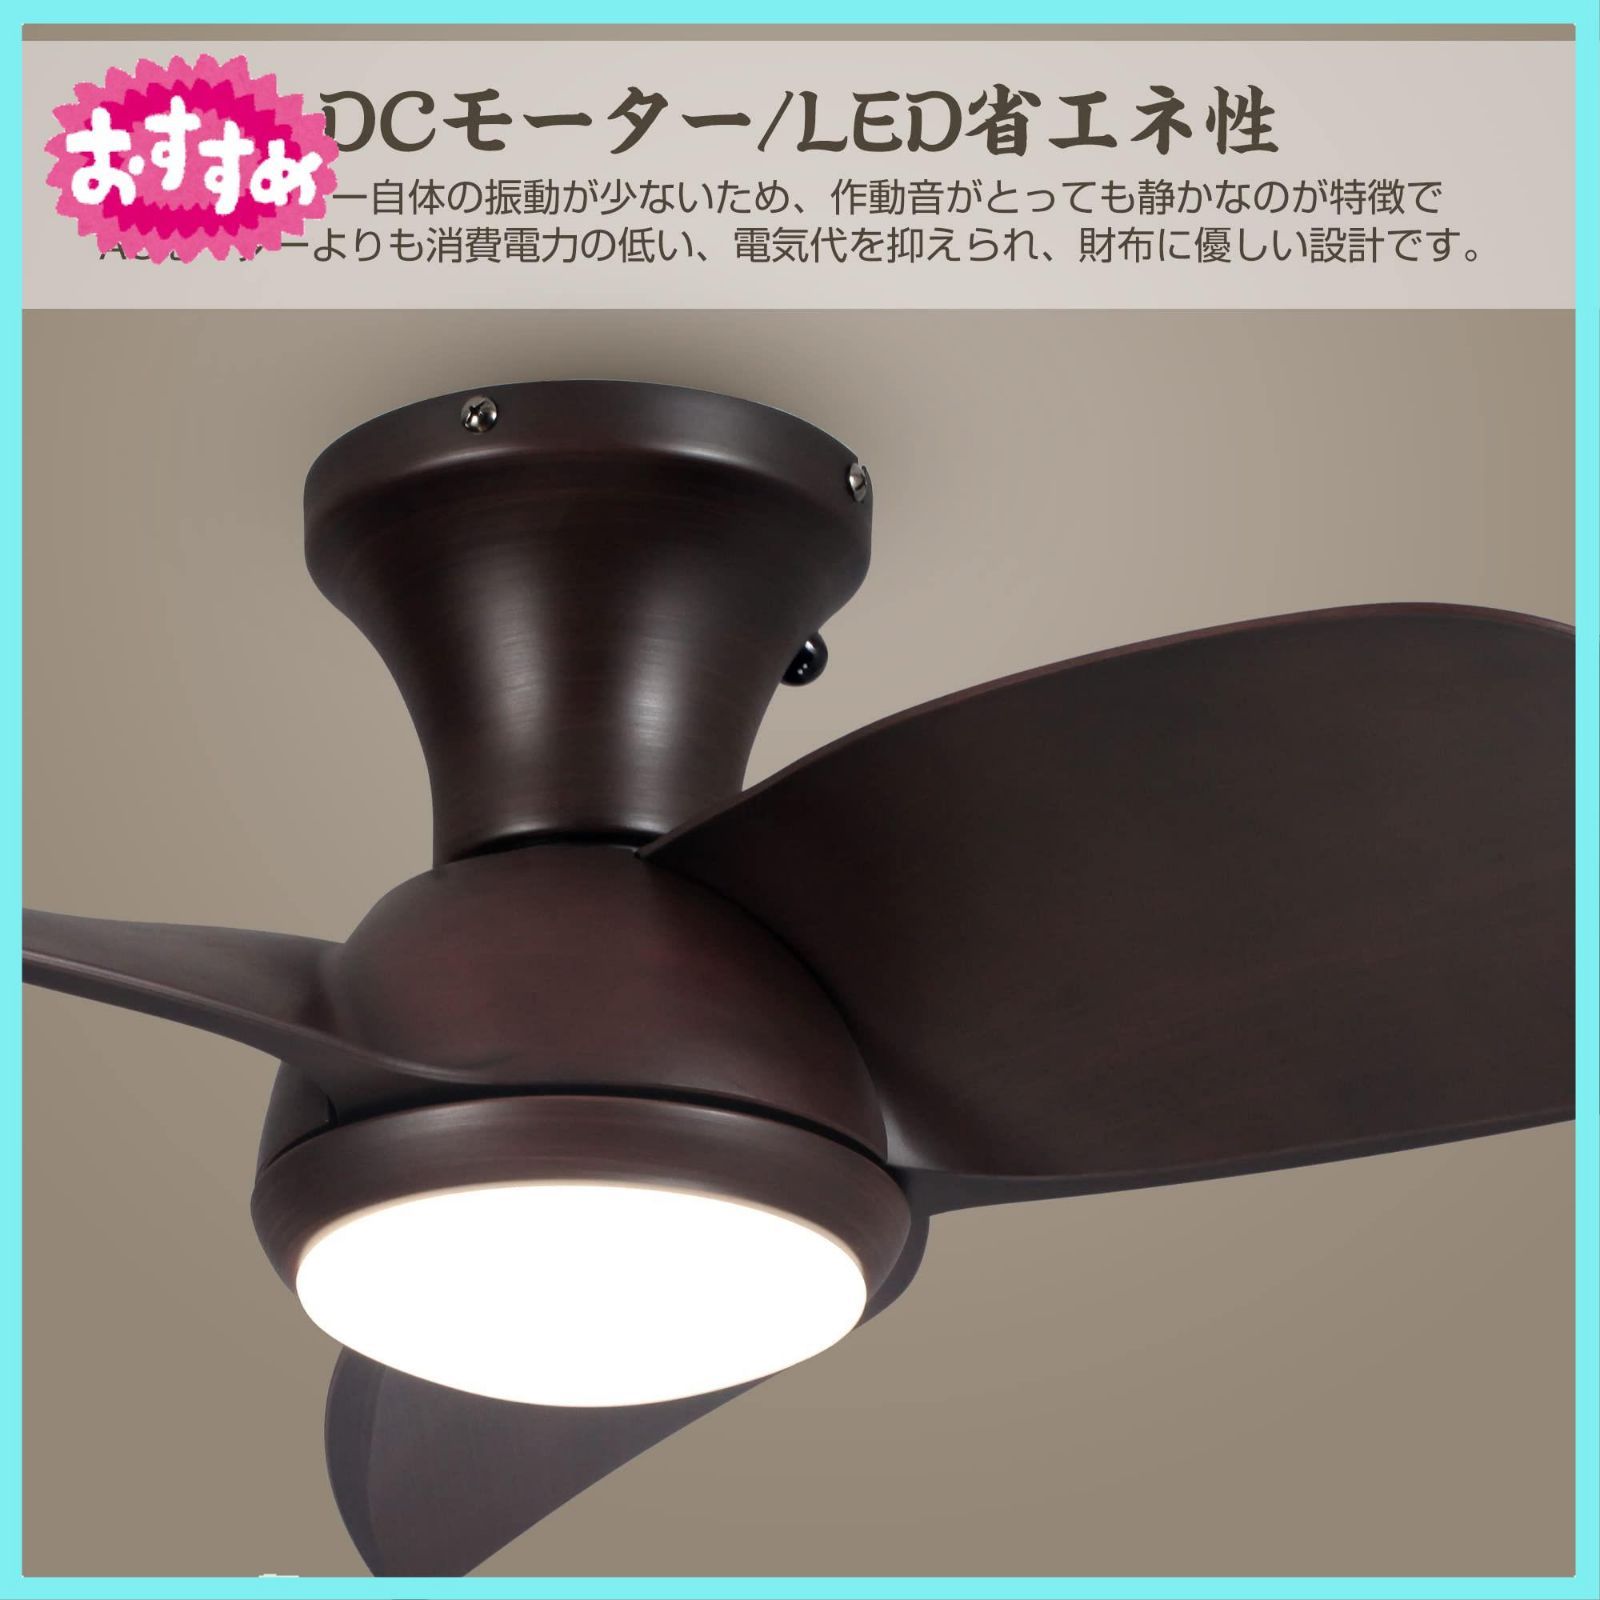 Parrot Uncle LED シーリングファンライト-